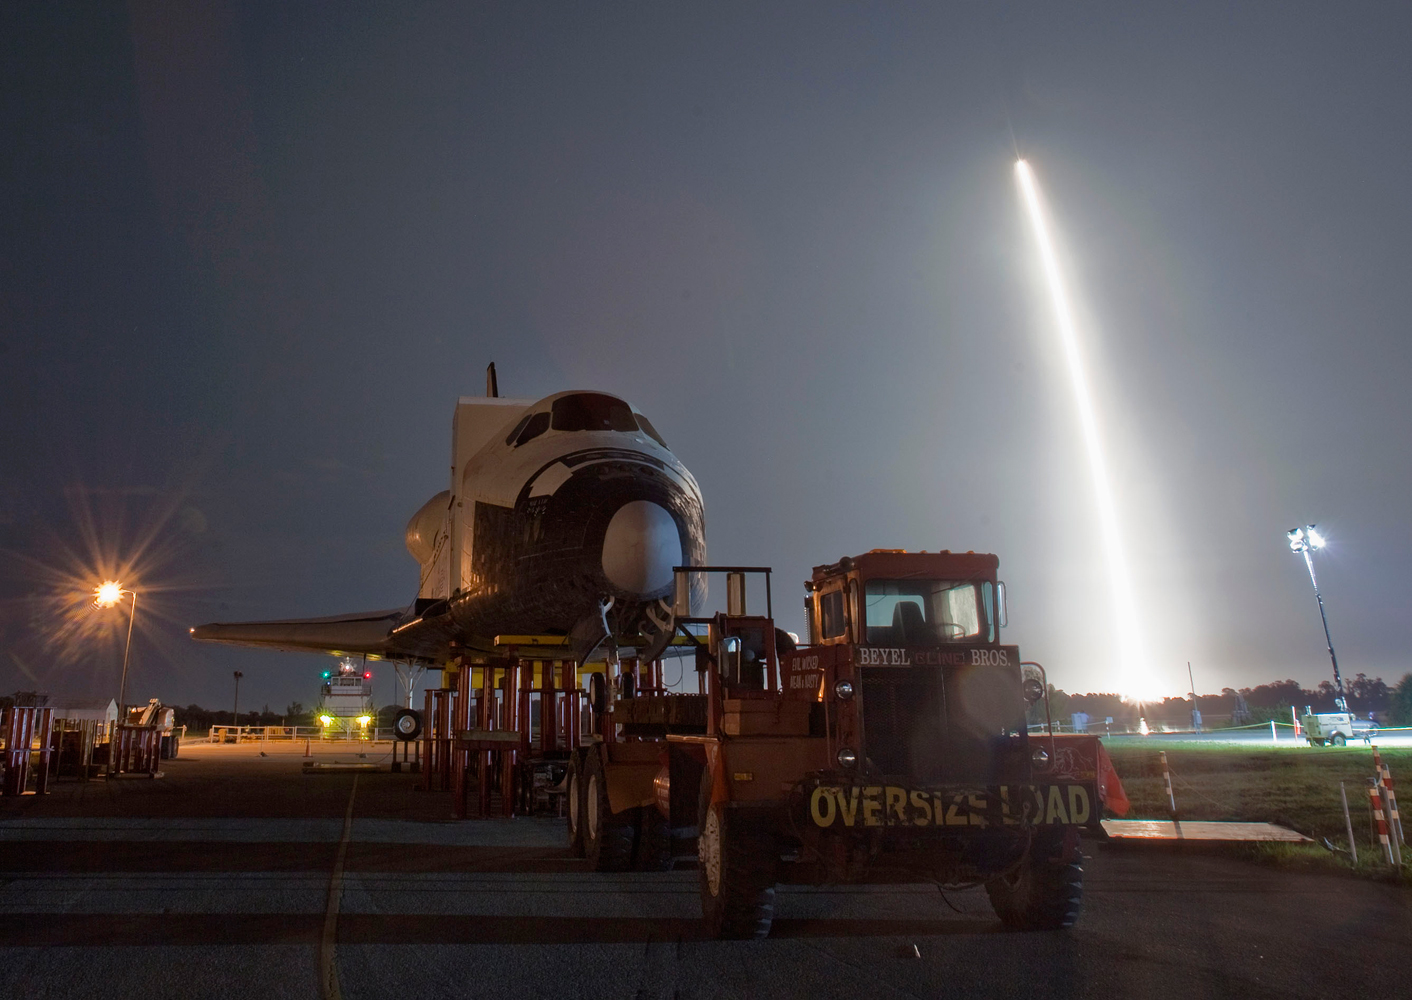 The SpaceX Falcon 9 test rocket lifts off from Space Launch Complex 40 at the Cape Canaveral Air Force Station in Cape Canaveral, Fla., on May 22, 2012.